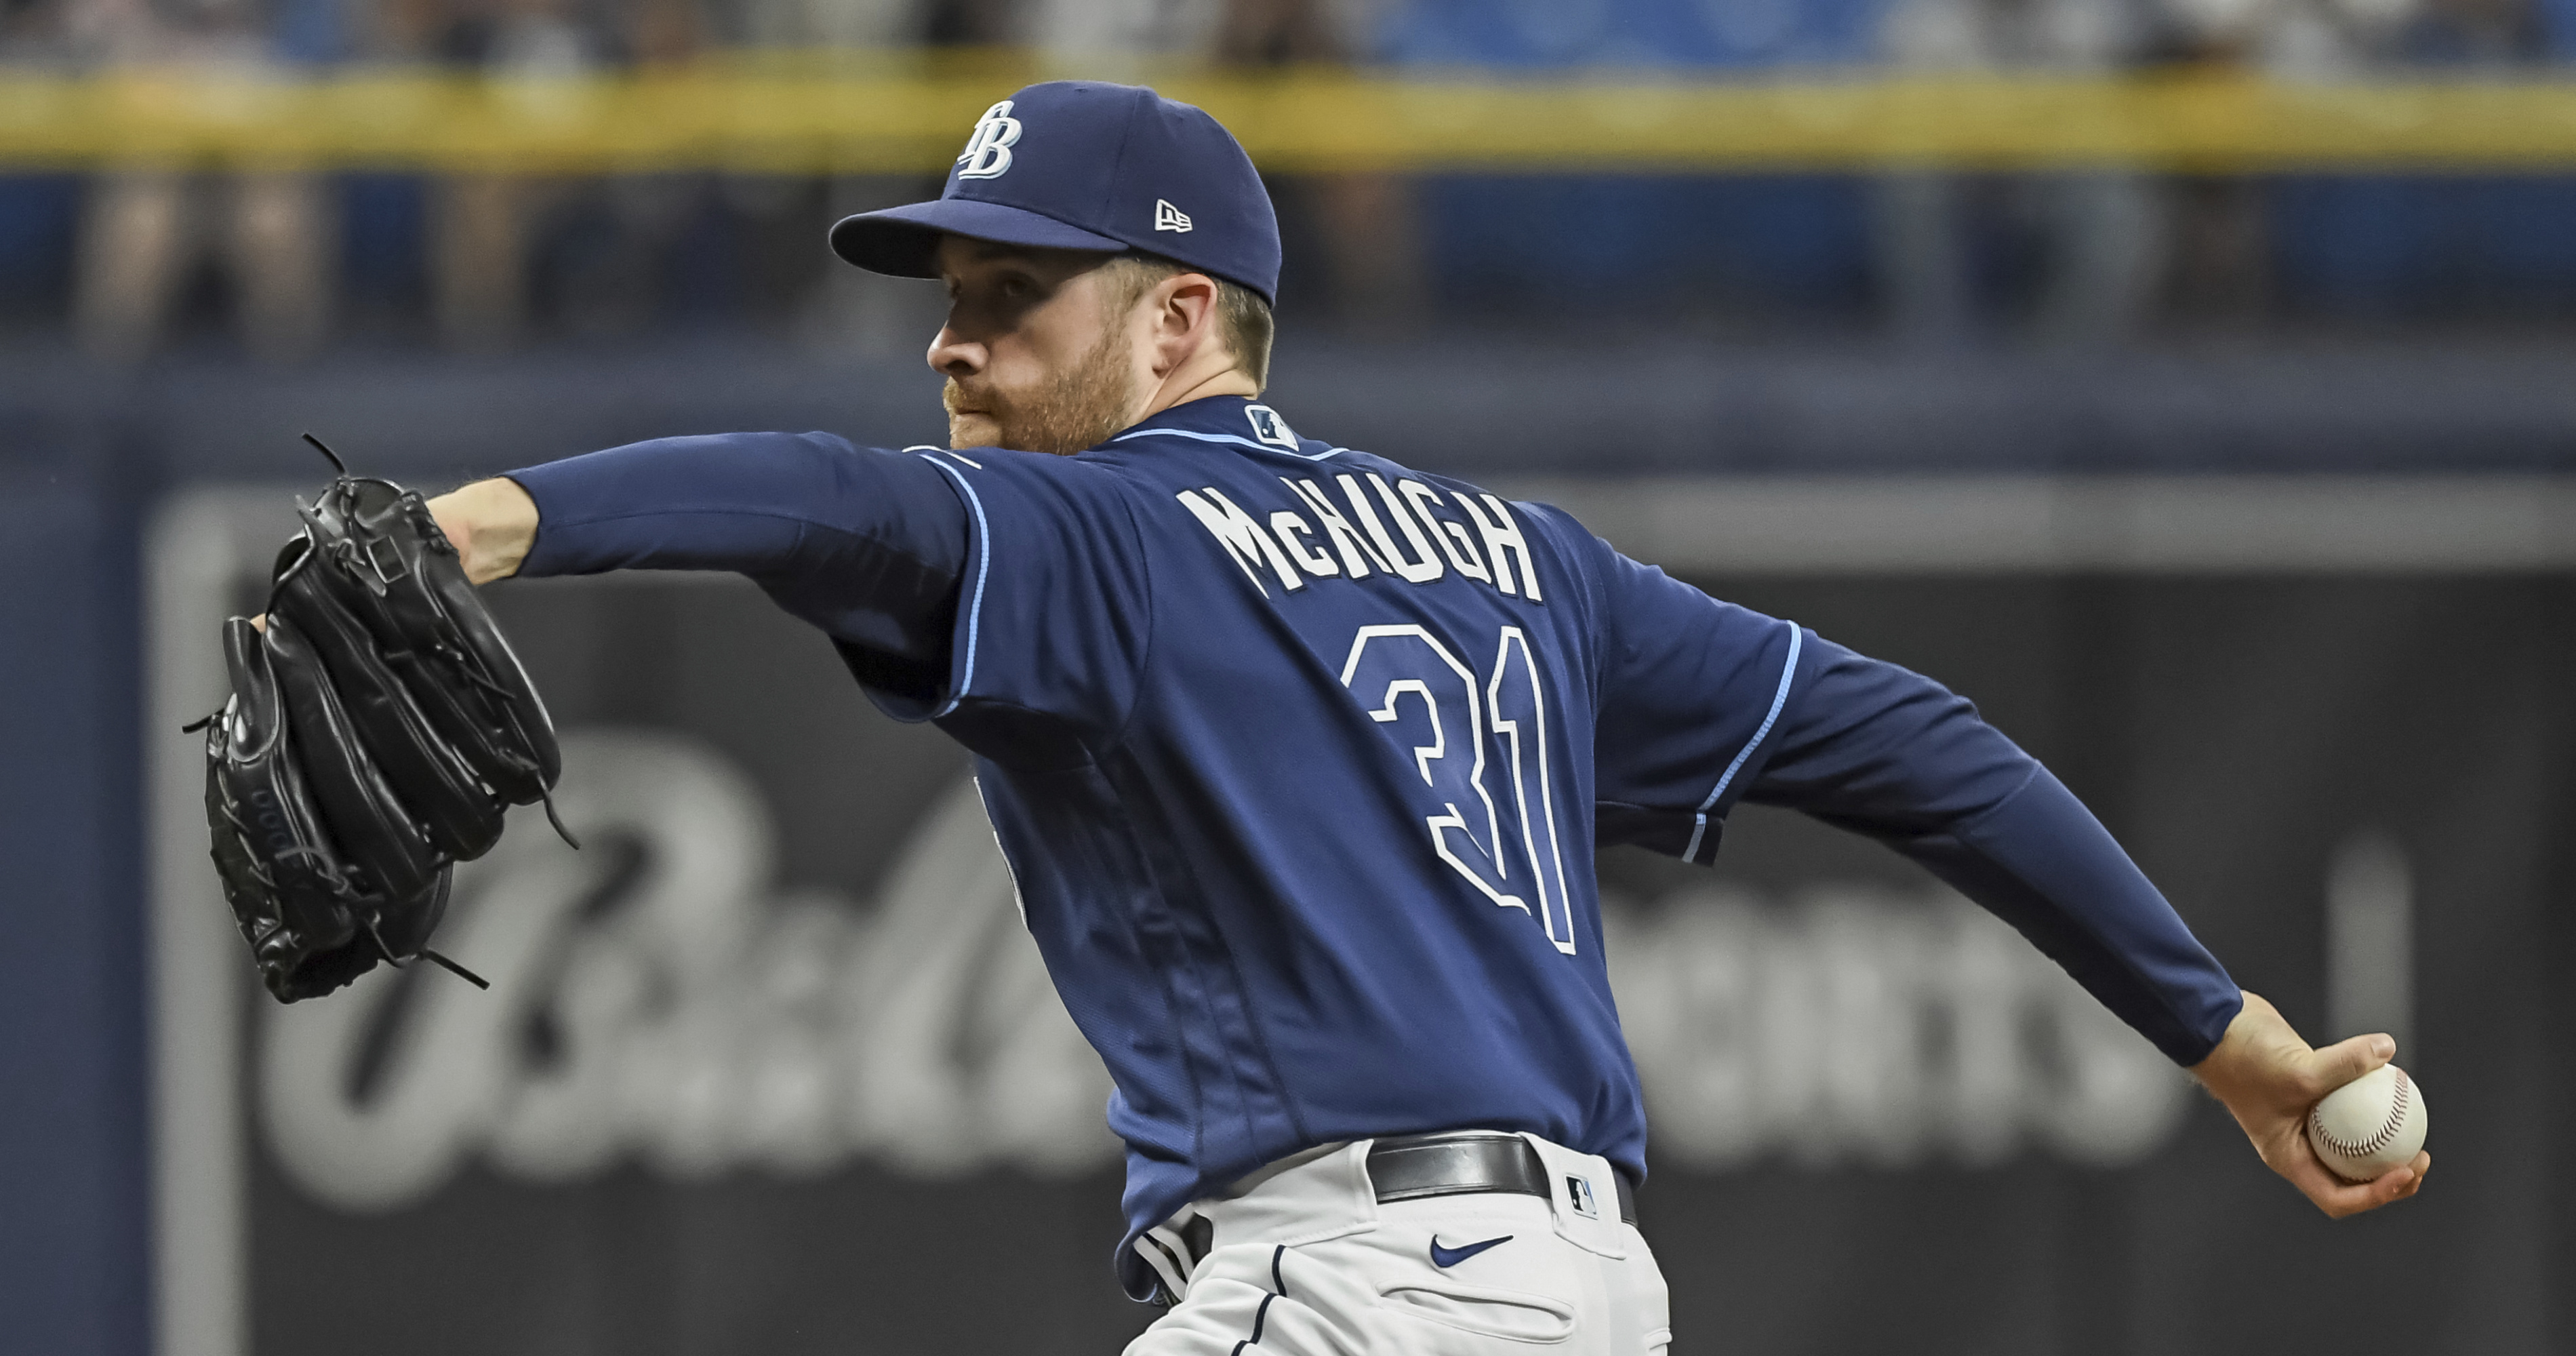 5 Rays Pitchers Combine to Throw 7Inning NoHitter vs. Cleveland